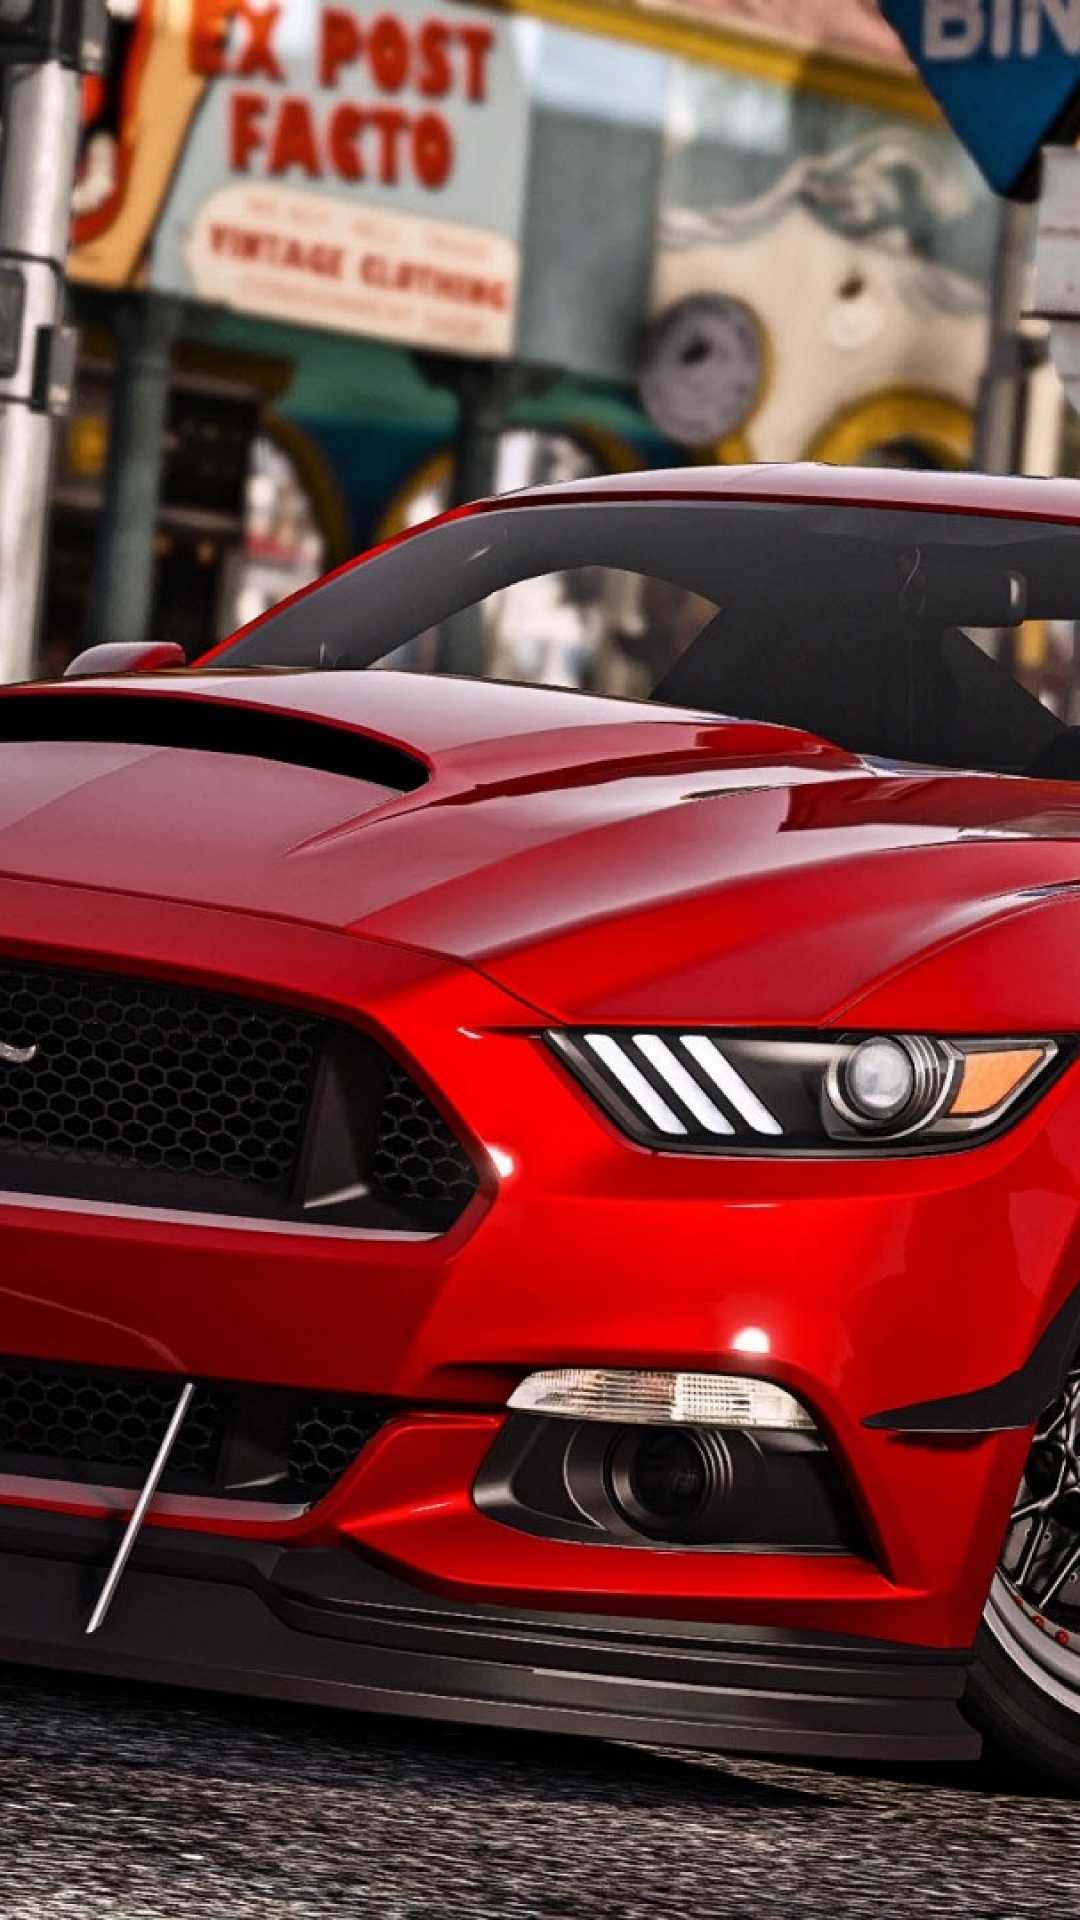 Iphone Ford Mustang Wallpaper 1